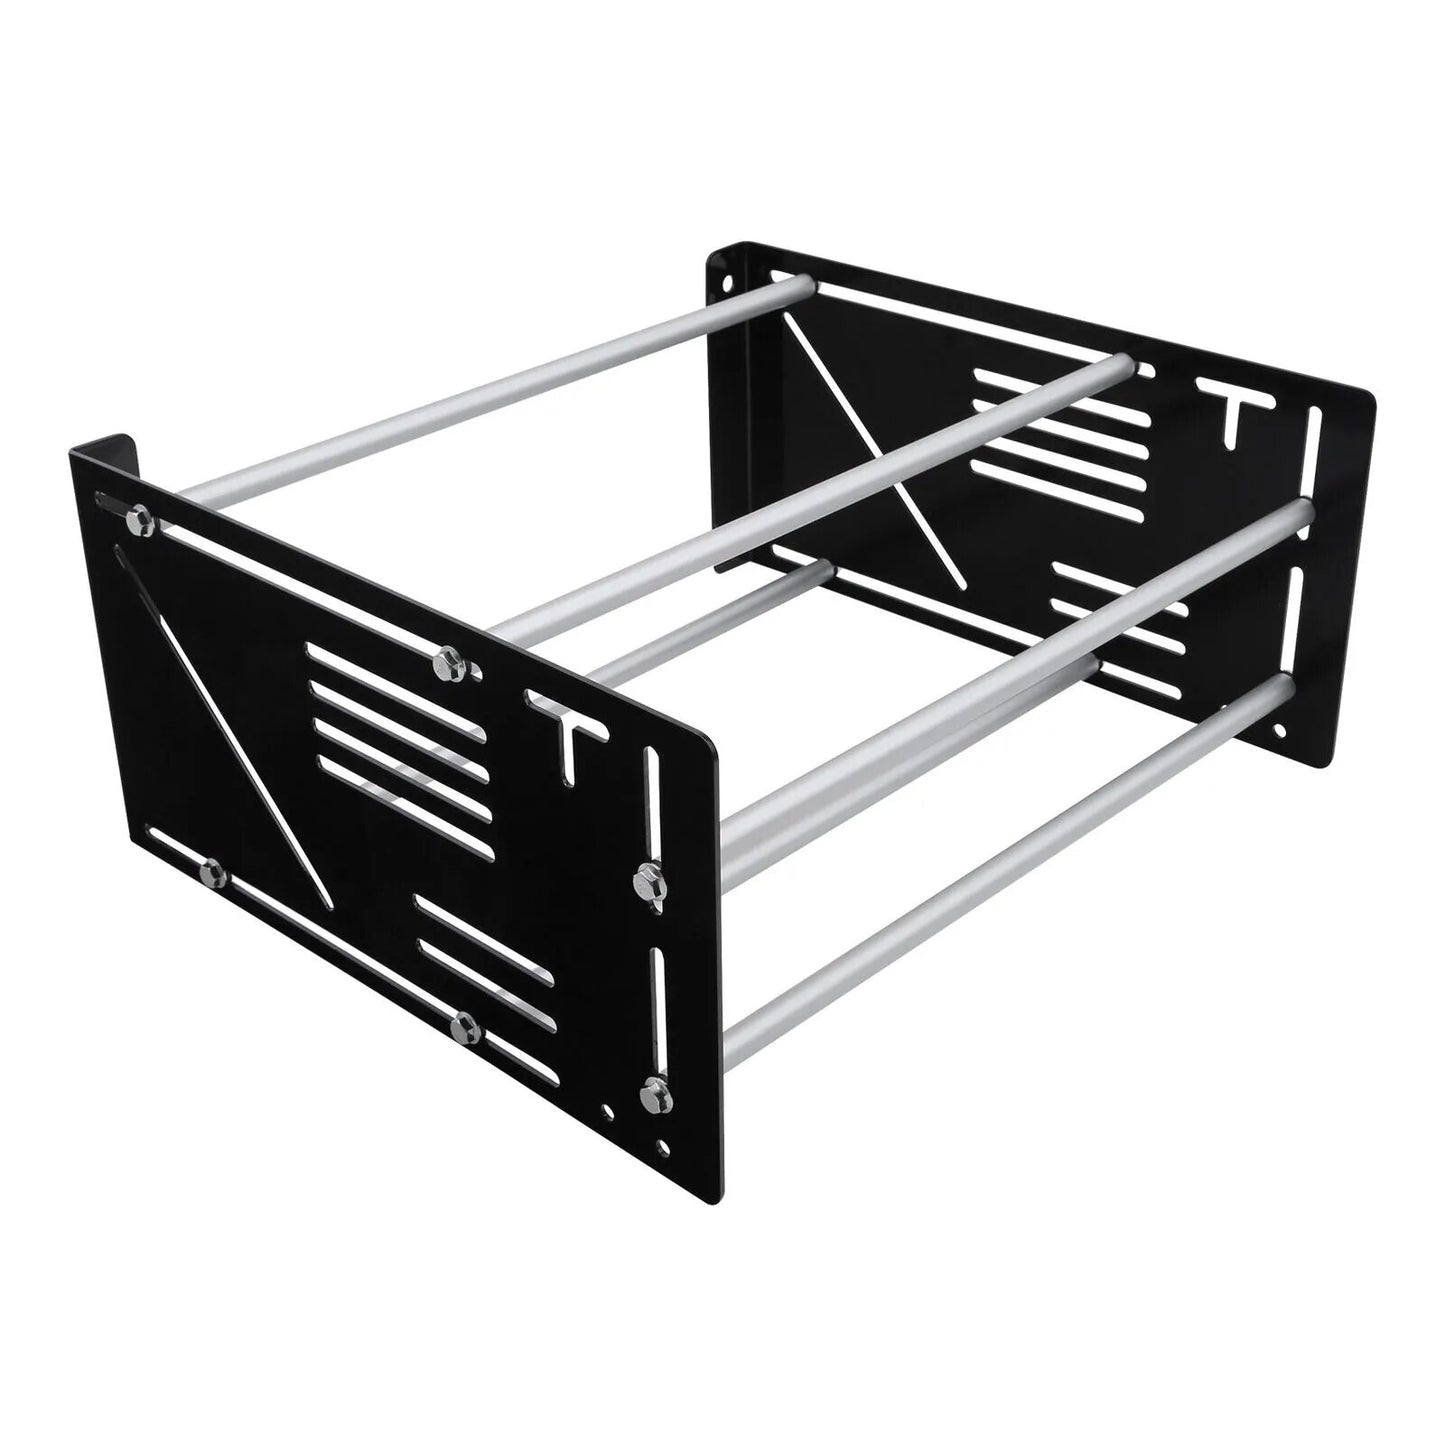 Voodoo Cycle House Wall Mount Tour Pack & Accessories Storage Rack For Harley-Davidson Touring Models